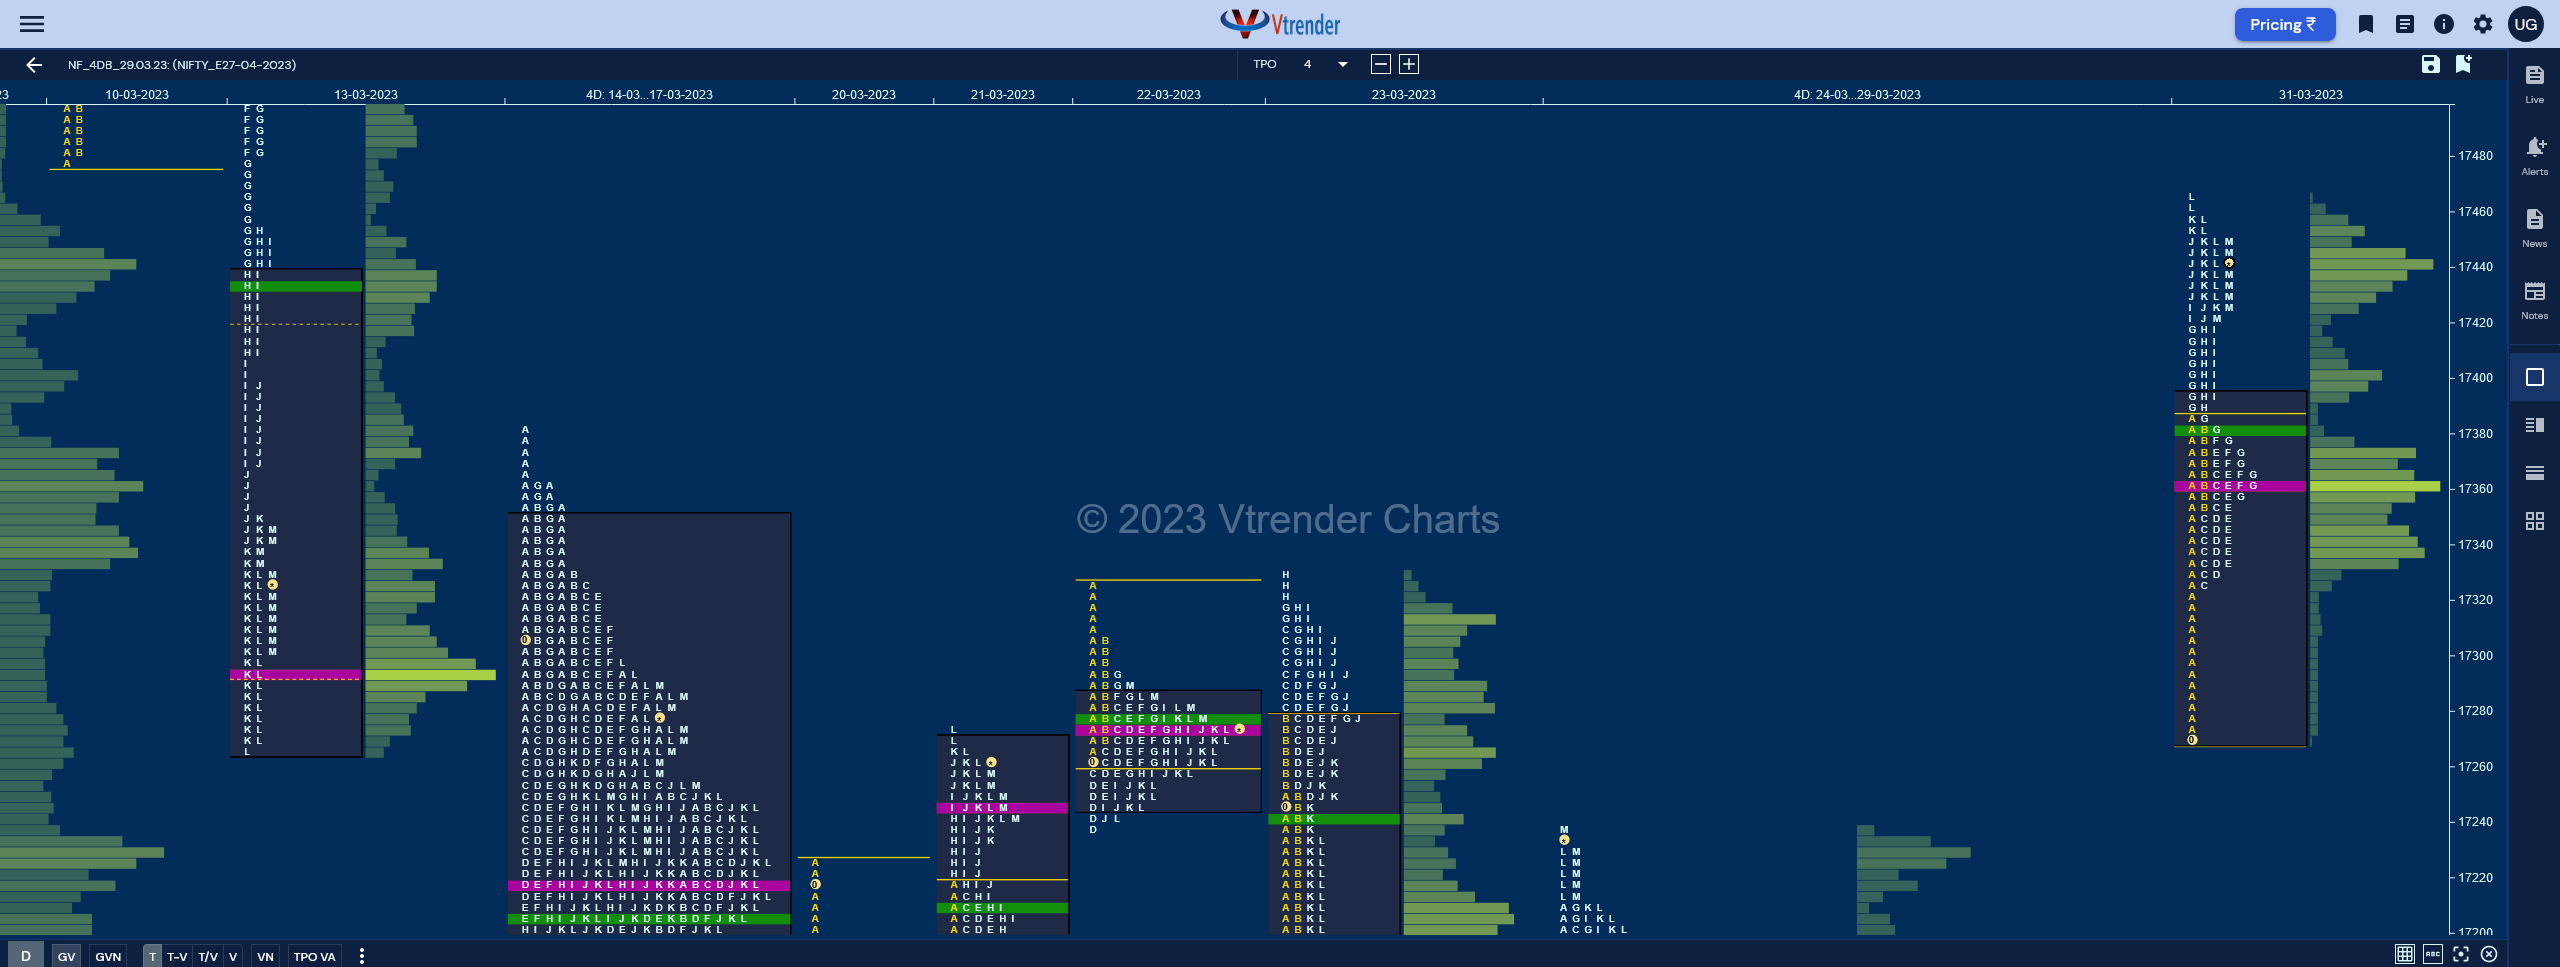 Nf 2 Market Profile Analysis Dated 05Th Apr 2023 Banknifty Futures, Charts, Day Trading, Intraday Trading, Intraday Trading Strategies, Market Profile, Market Profile Trading Strategies, Nifty Futures, Order Flow Analysis, Support And Resistance, Technical Analysis, Trading Strategies, Volume Profile Trading